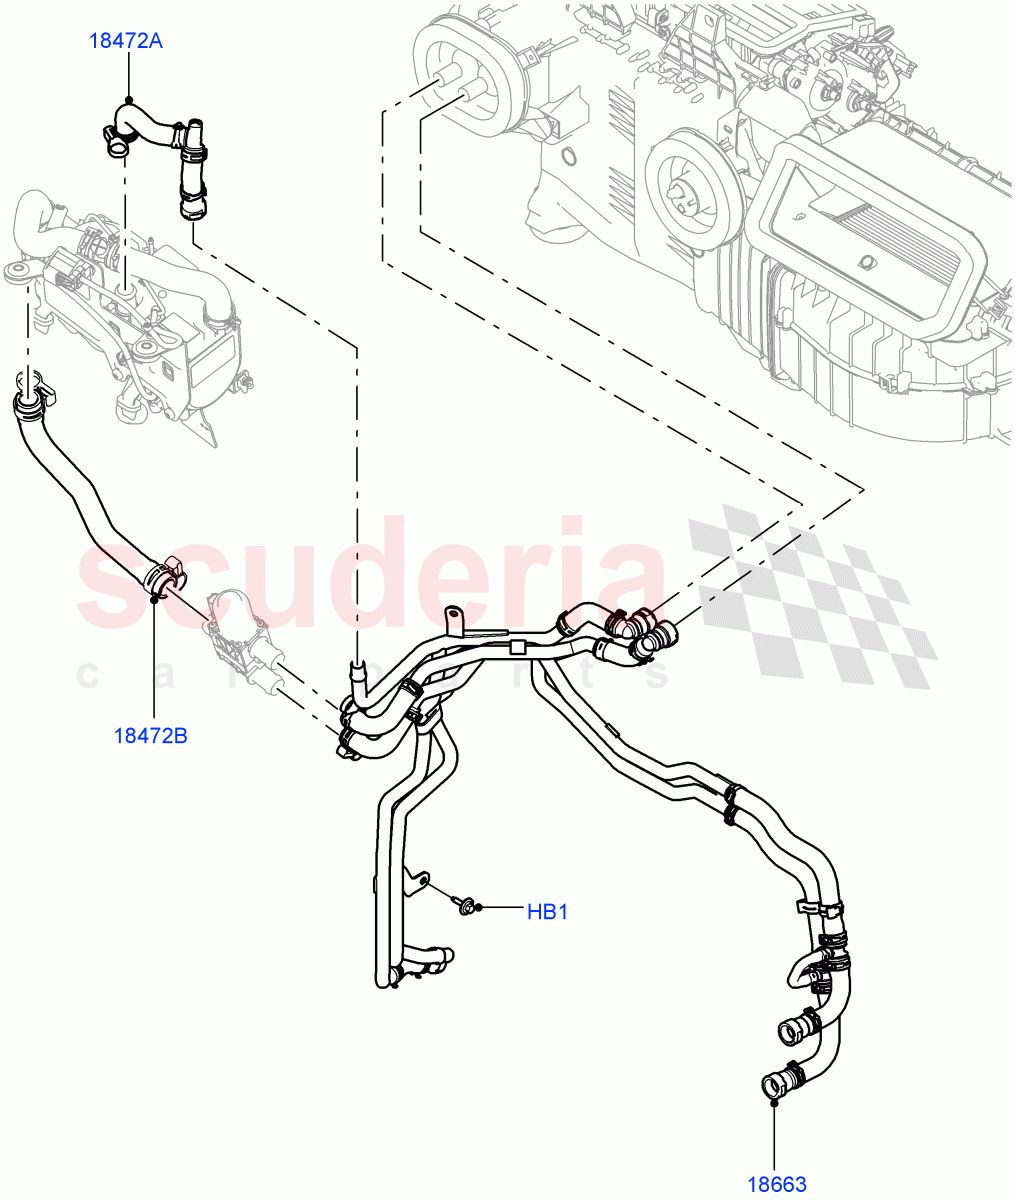 Heater Hoses(Front)(2.0L I4 DSL HIGH DOHC AJ200,With Fuel Fired Heater,With Air Conditioning - Front/Rear,Park Heating With Remote Control)((V)FROMHA000001,(V)TOHA999999) of Land Rover Land Rover Range Rover Sport (2014+) [4.4 DOHC Diesel V8 DITC]